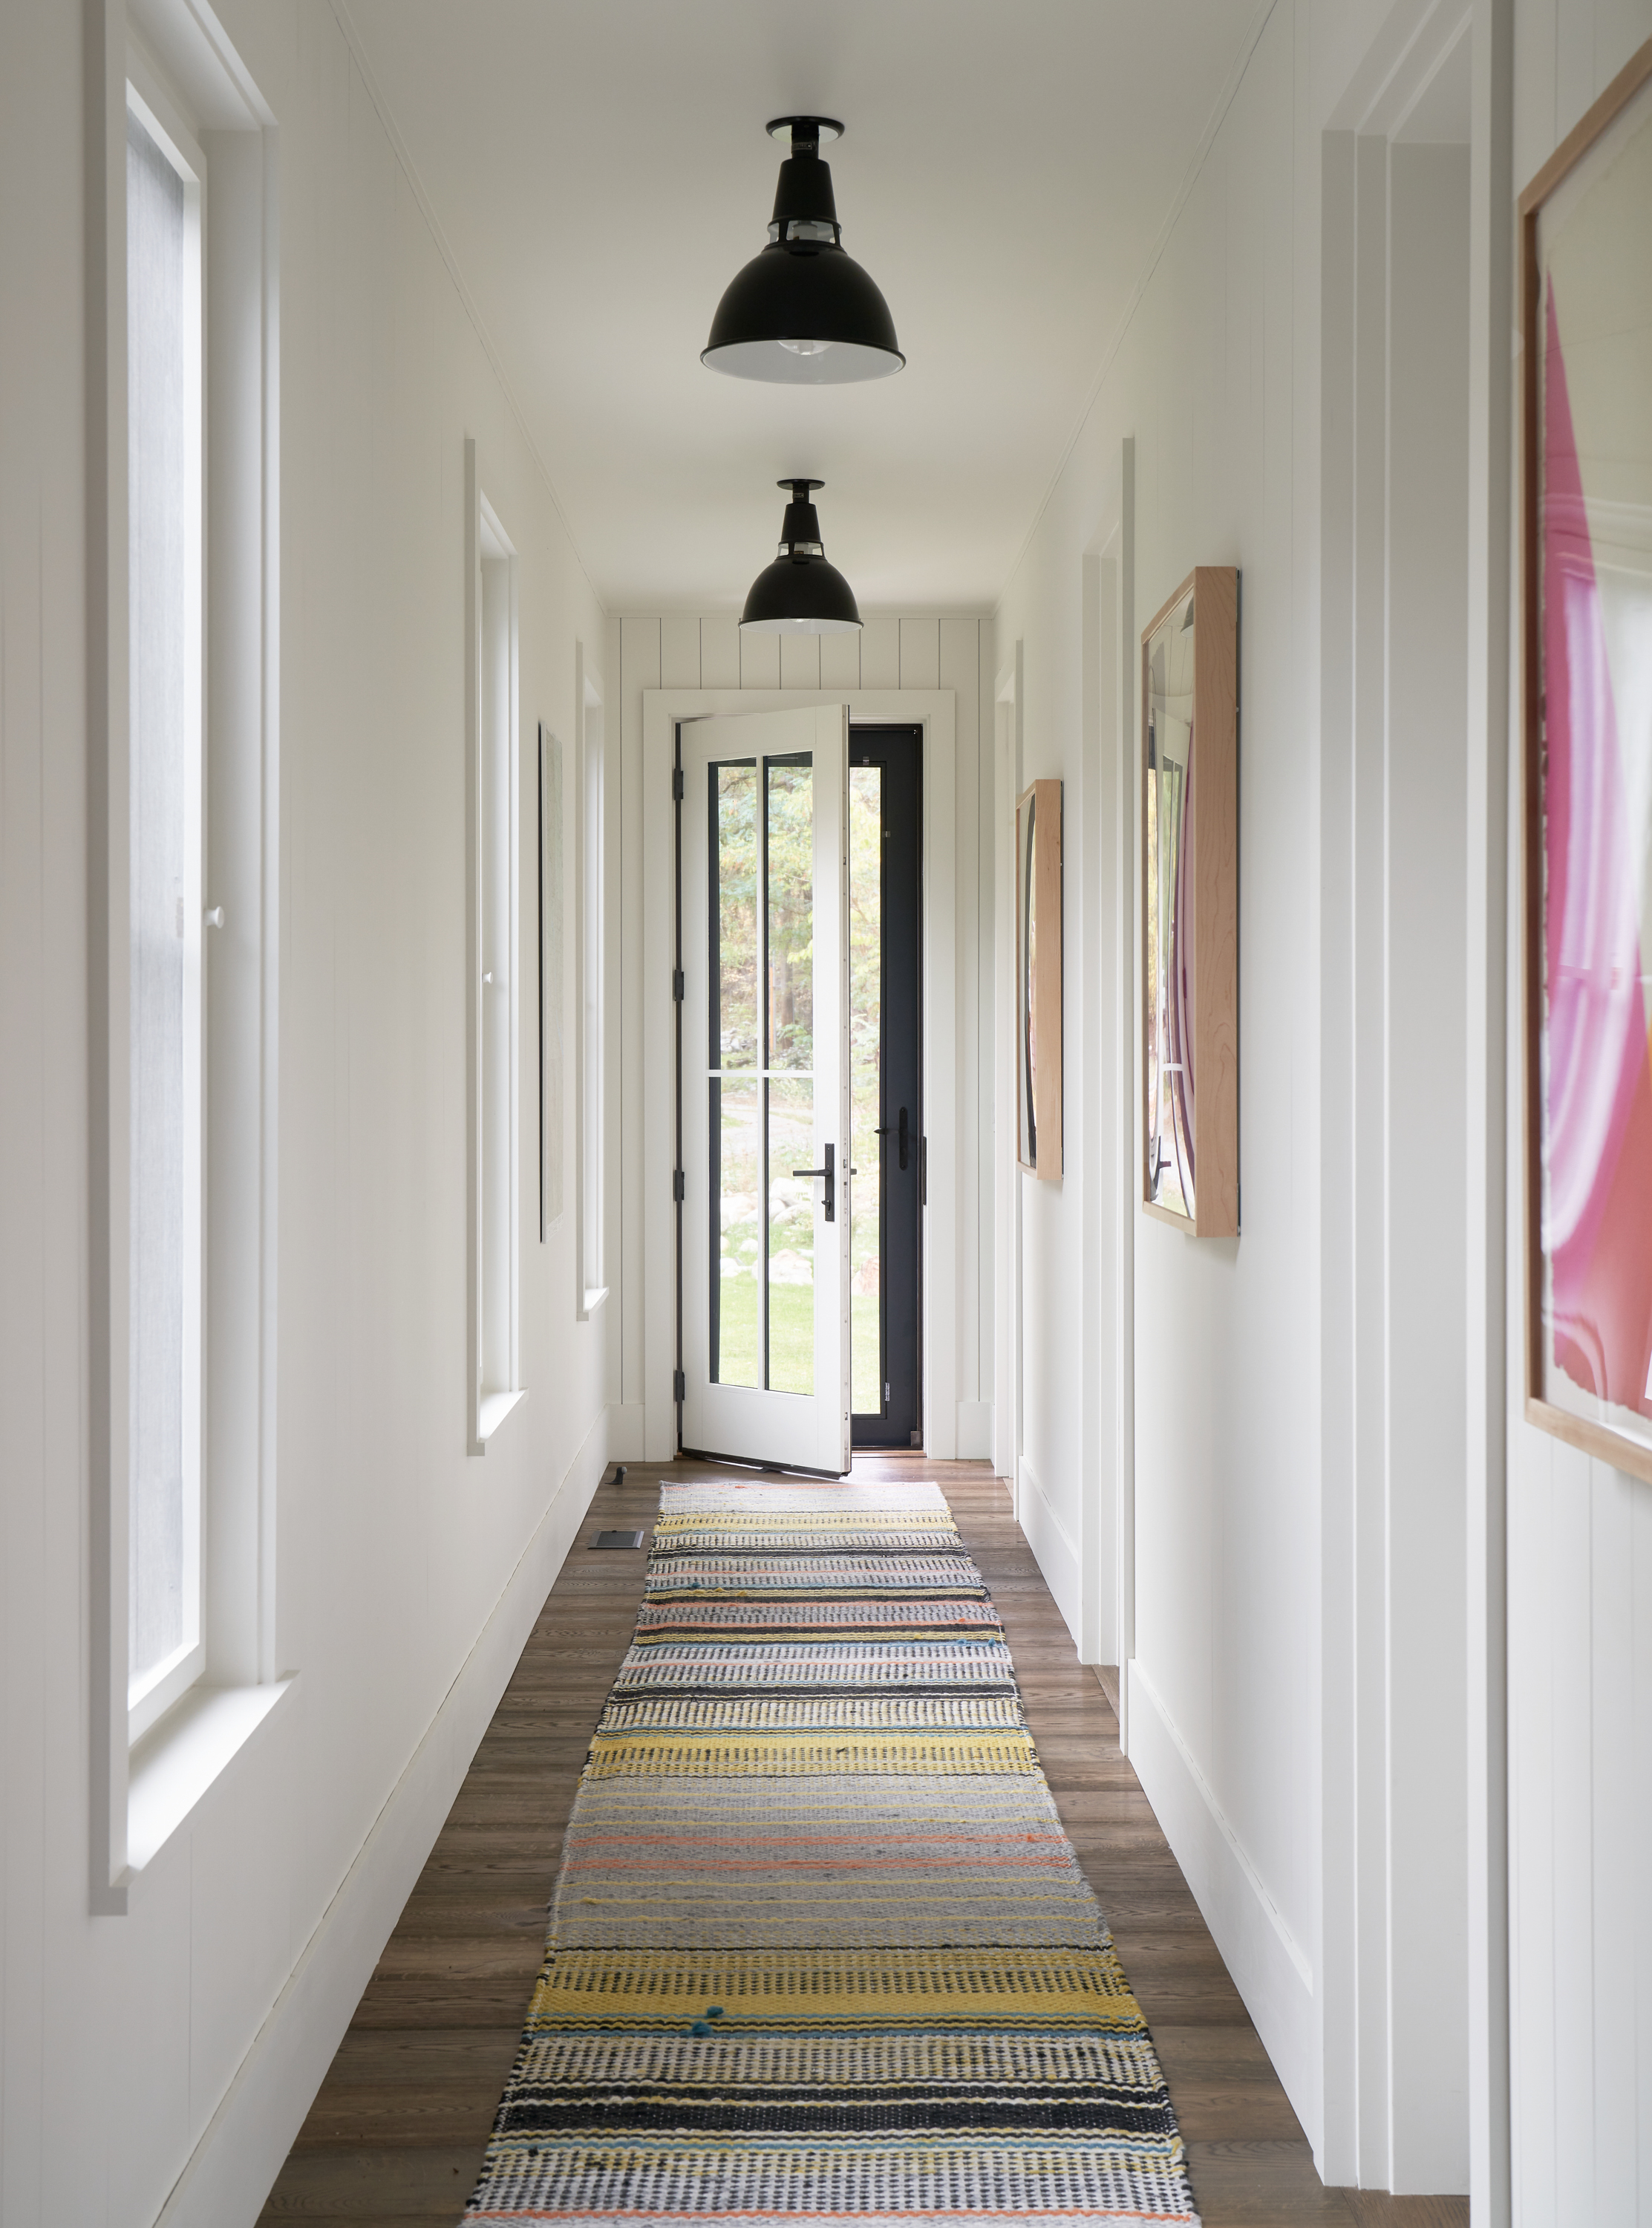 A view down the hallway of the bedroom wing, with industrial-inspired pendants overhead.